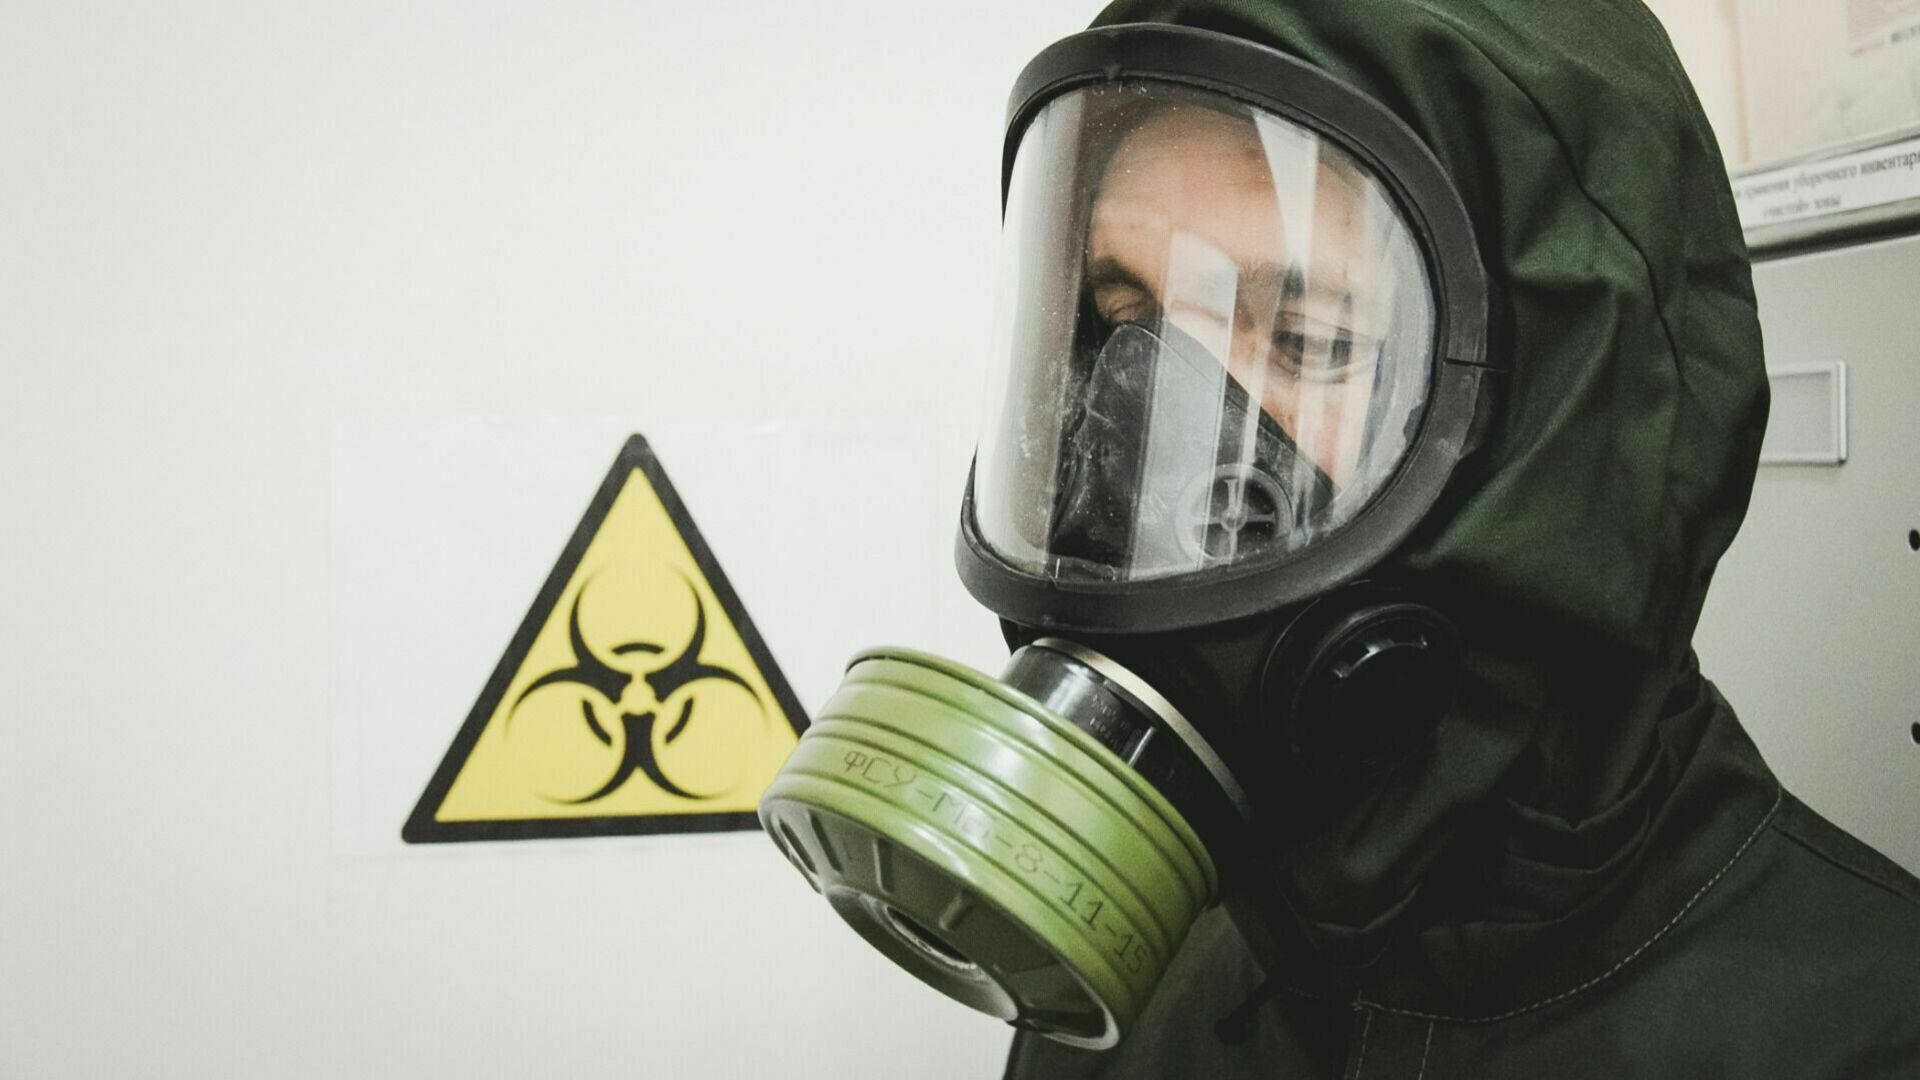 The military found out about Ukraine's plans to accuse Russia of radioactive contamination of Chernobyl